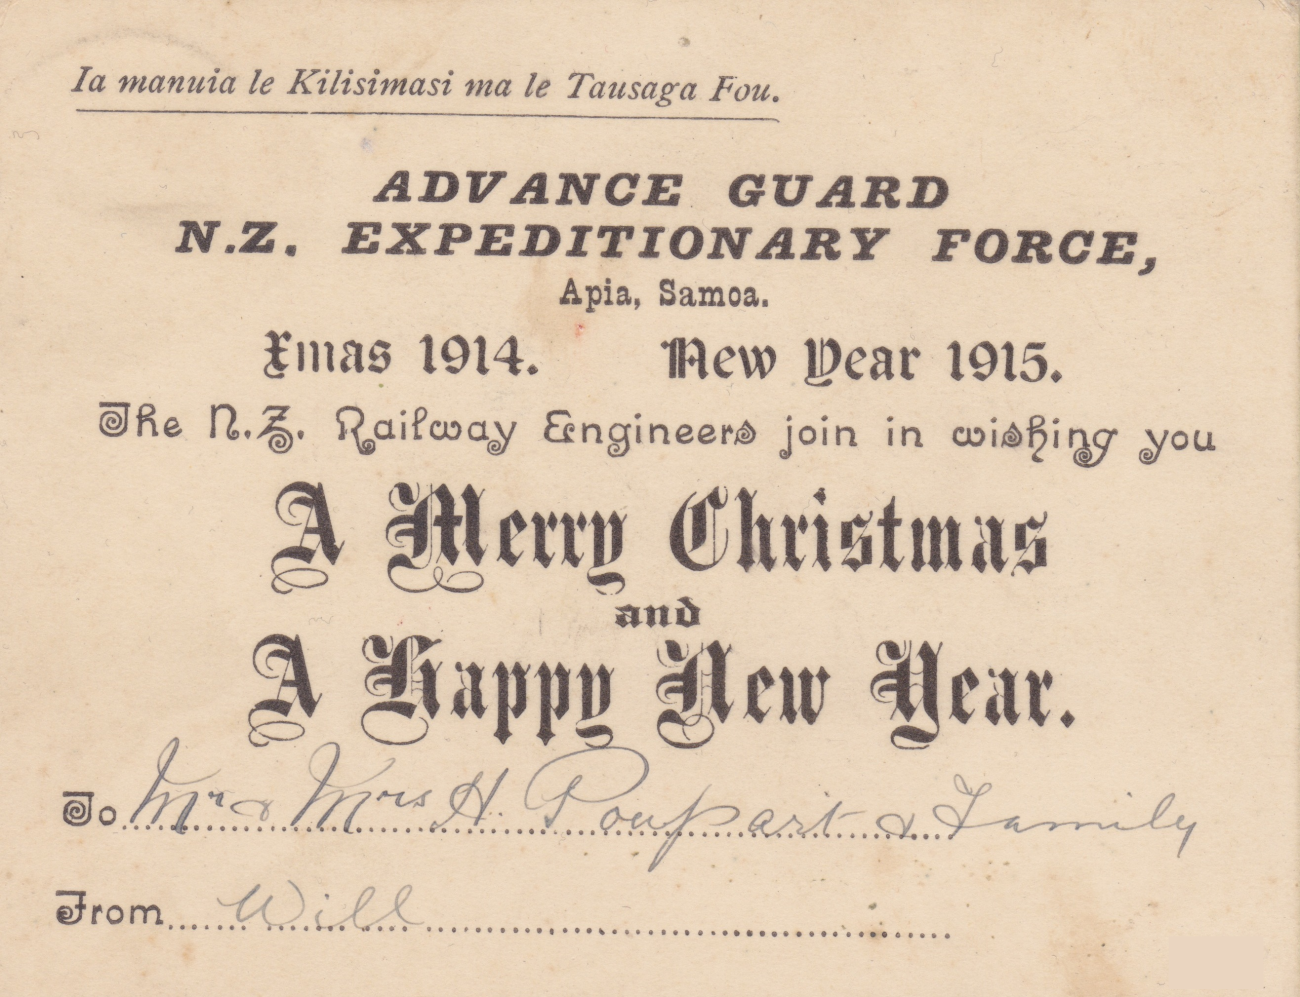 Card sent by New Zealand engineer in Samoa wishing the recipient a Merry Christmas and a Happy New Year.  1915 Would be a tragic year for many New Zealanders. Lemuel Lyes Collection